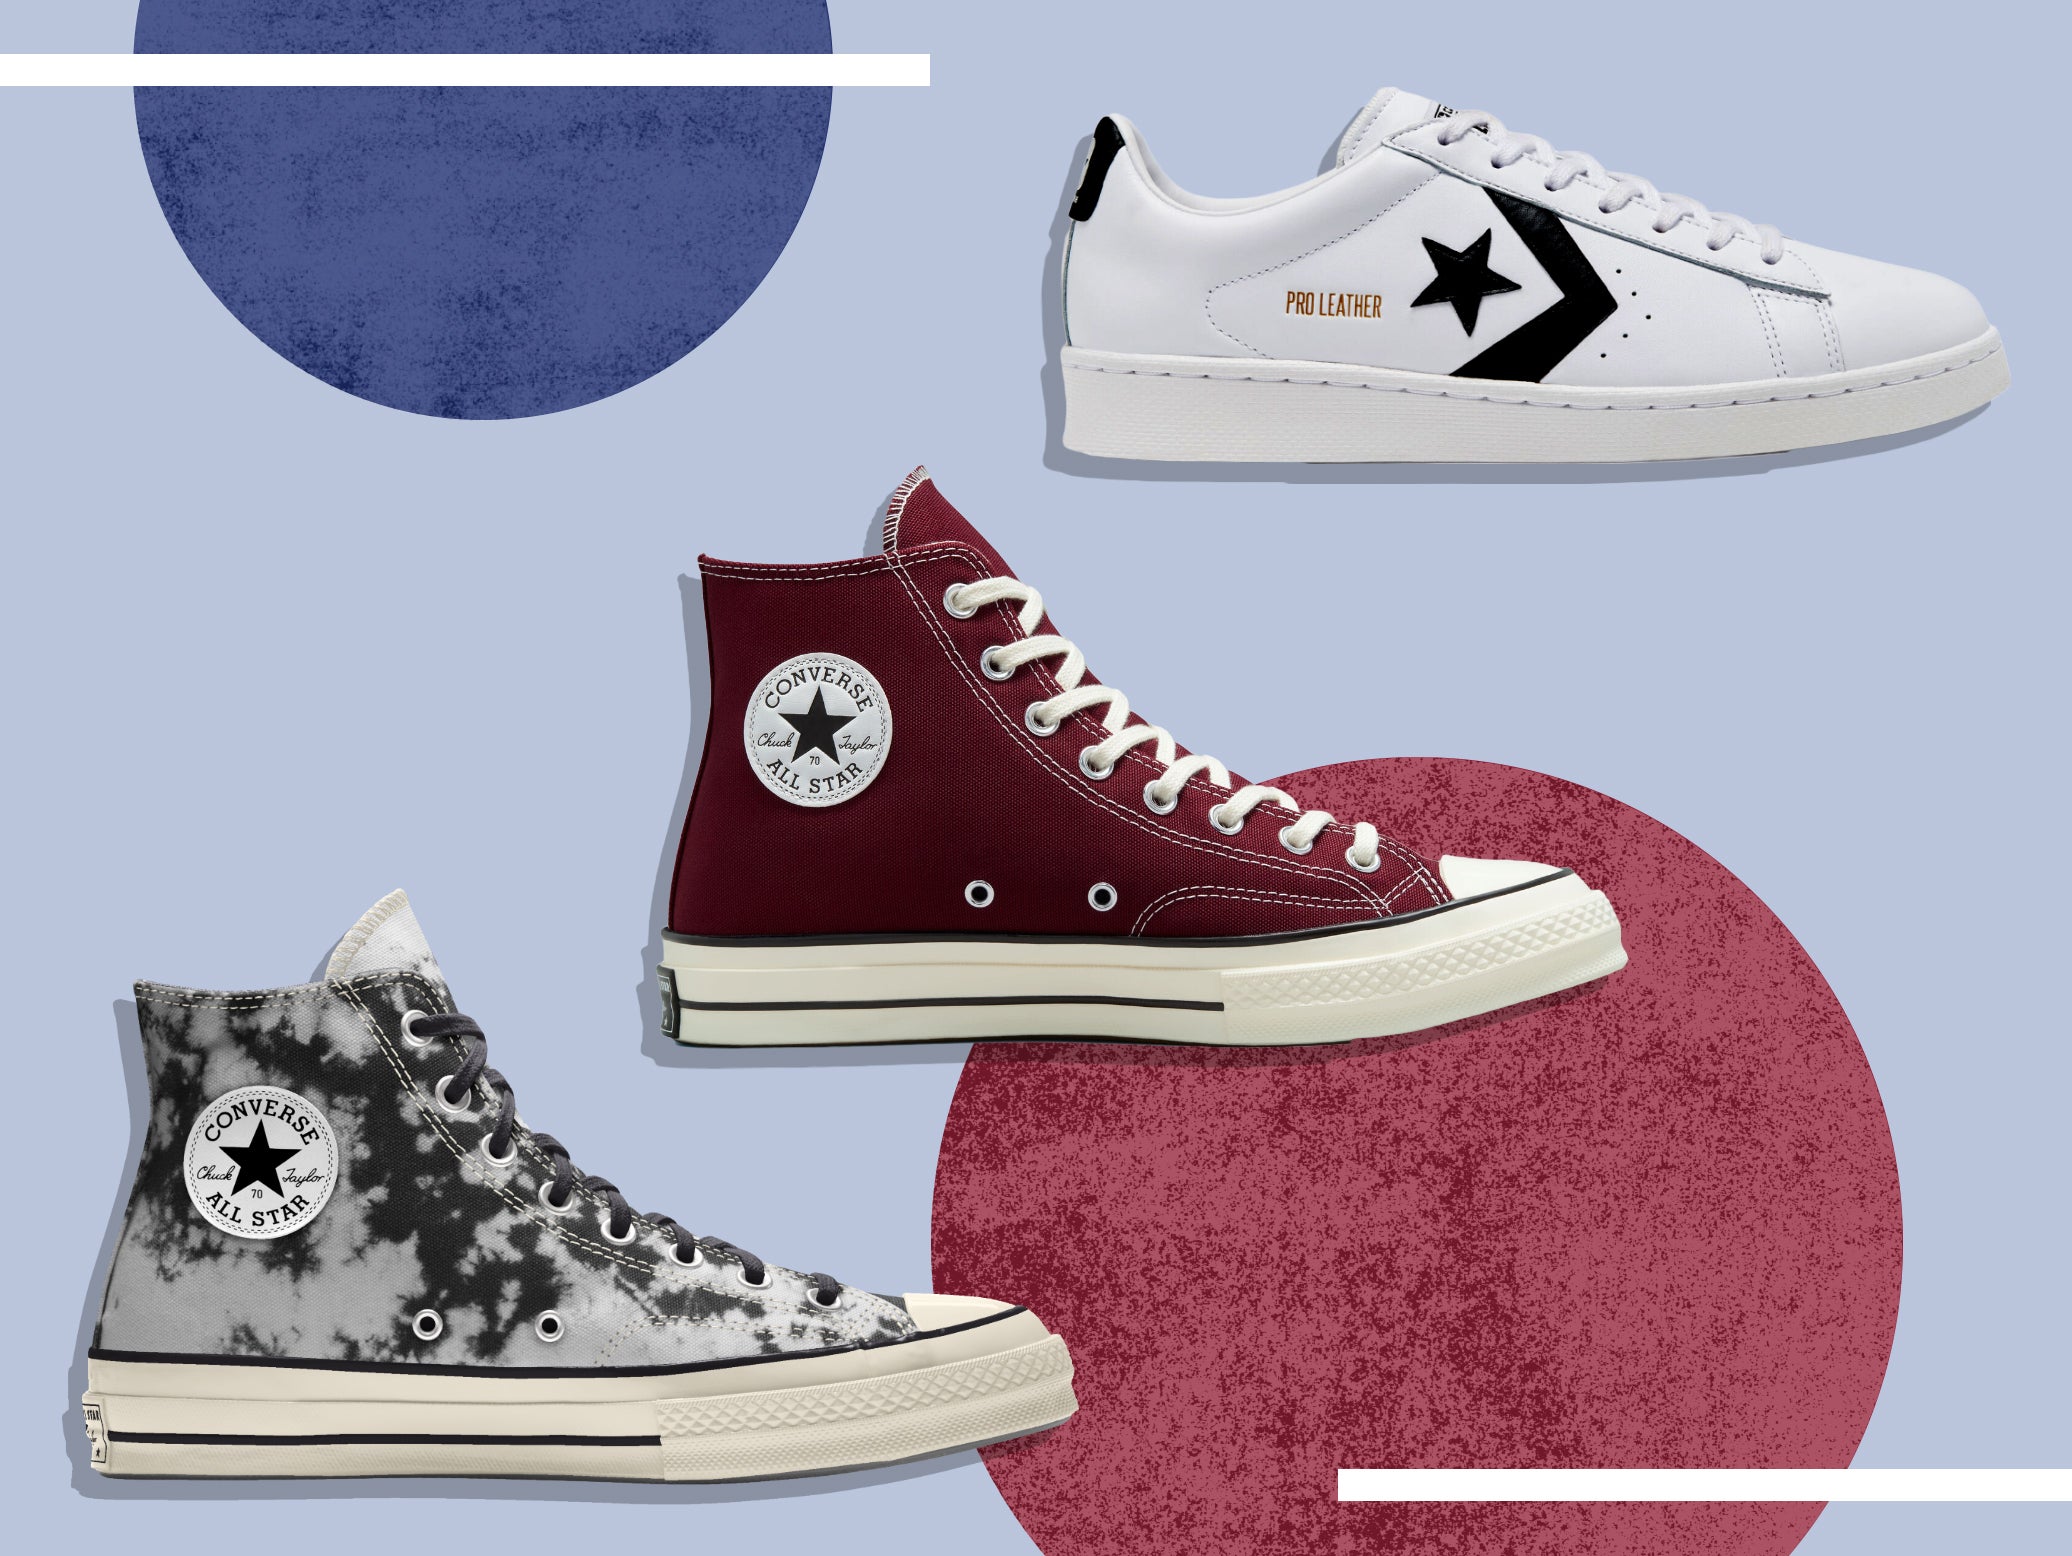 Converse Black Friday sale 2021: Best trainer and clothing deals to know  about | The Independent